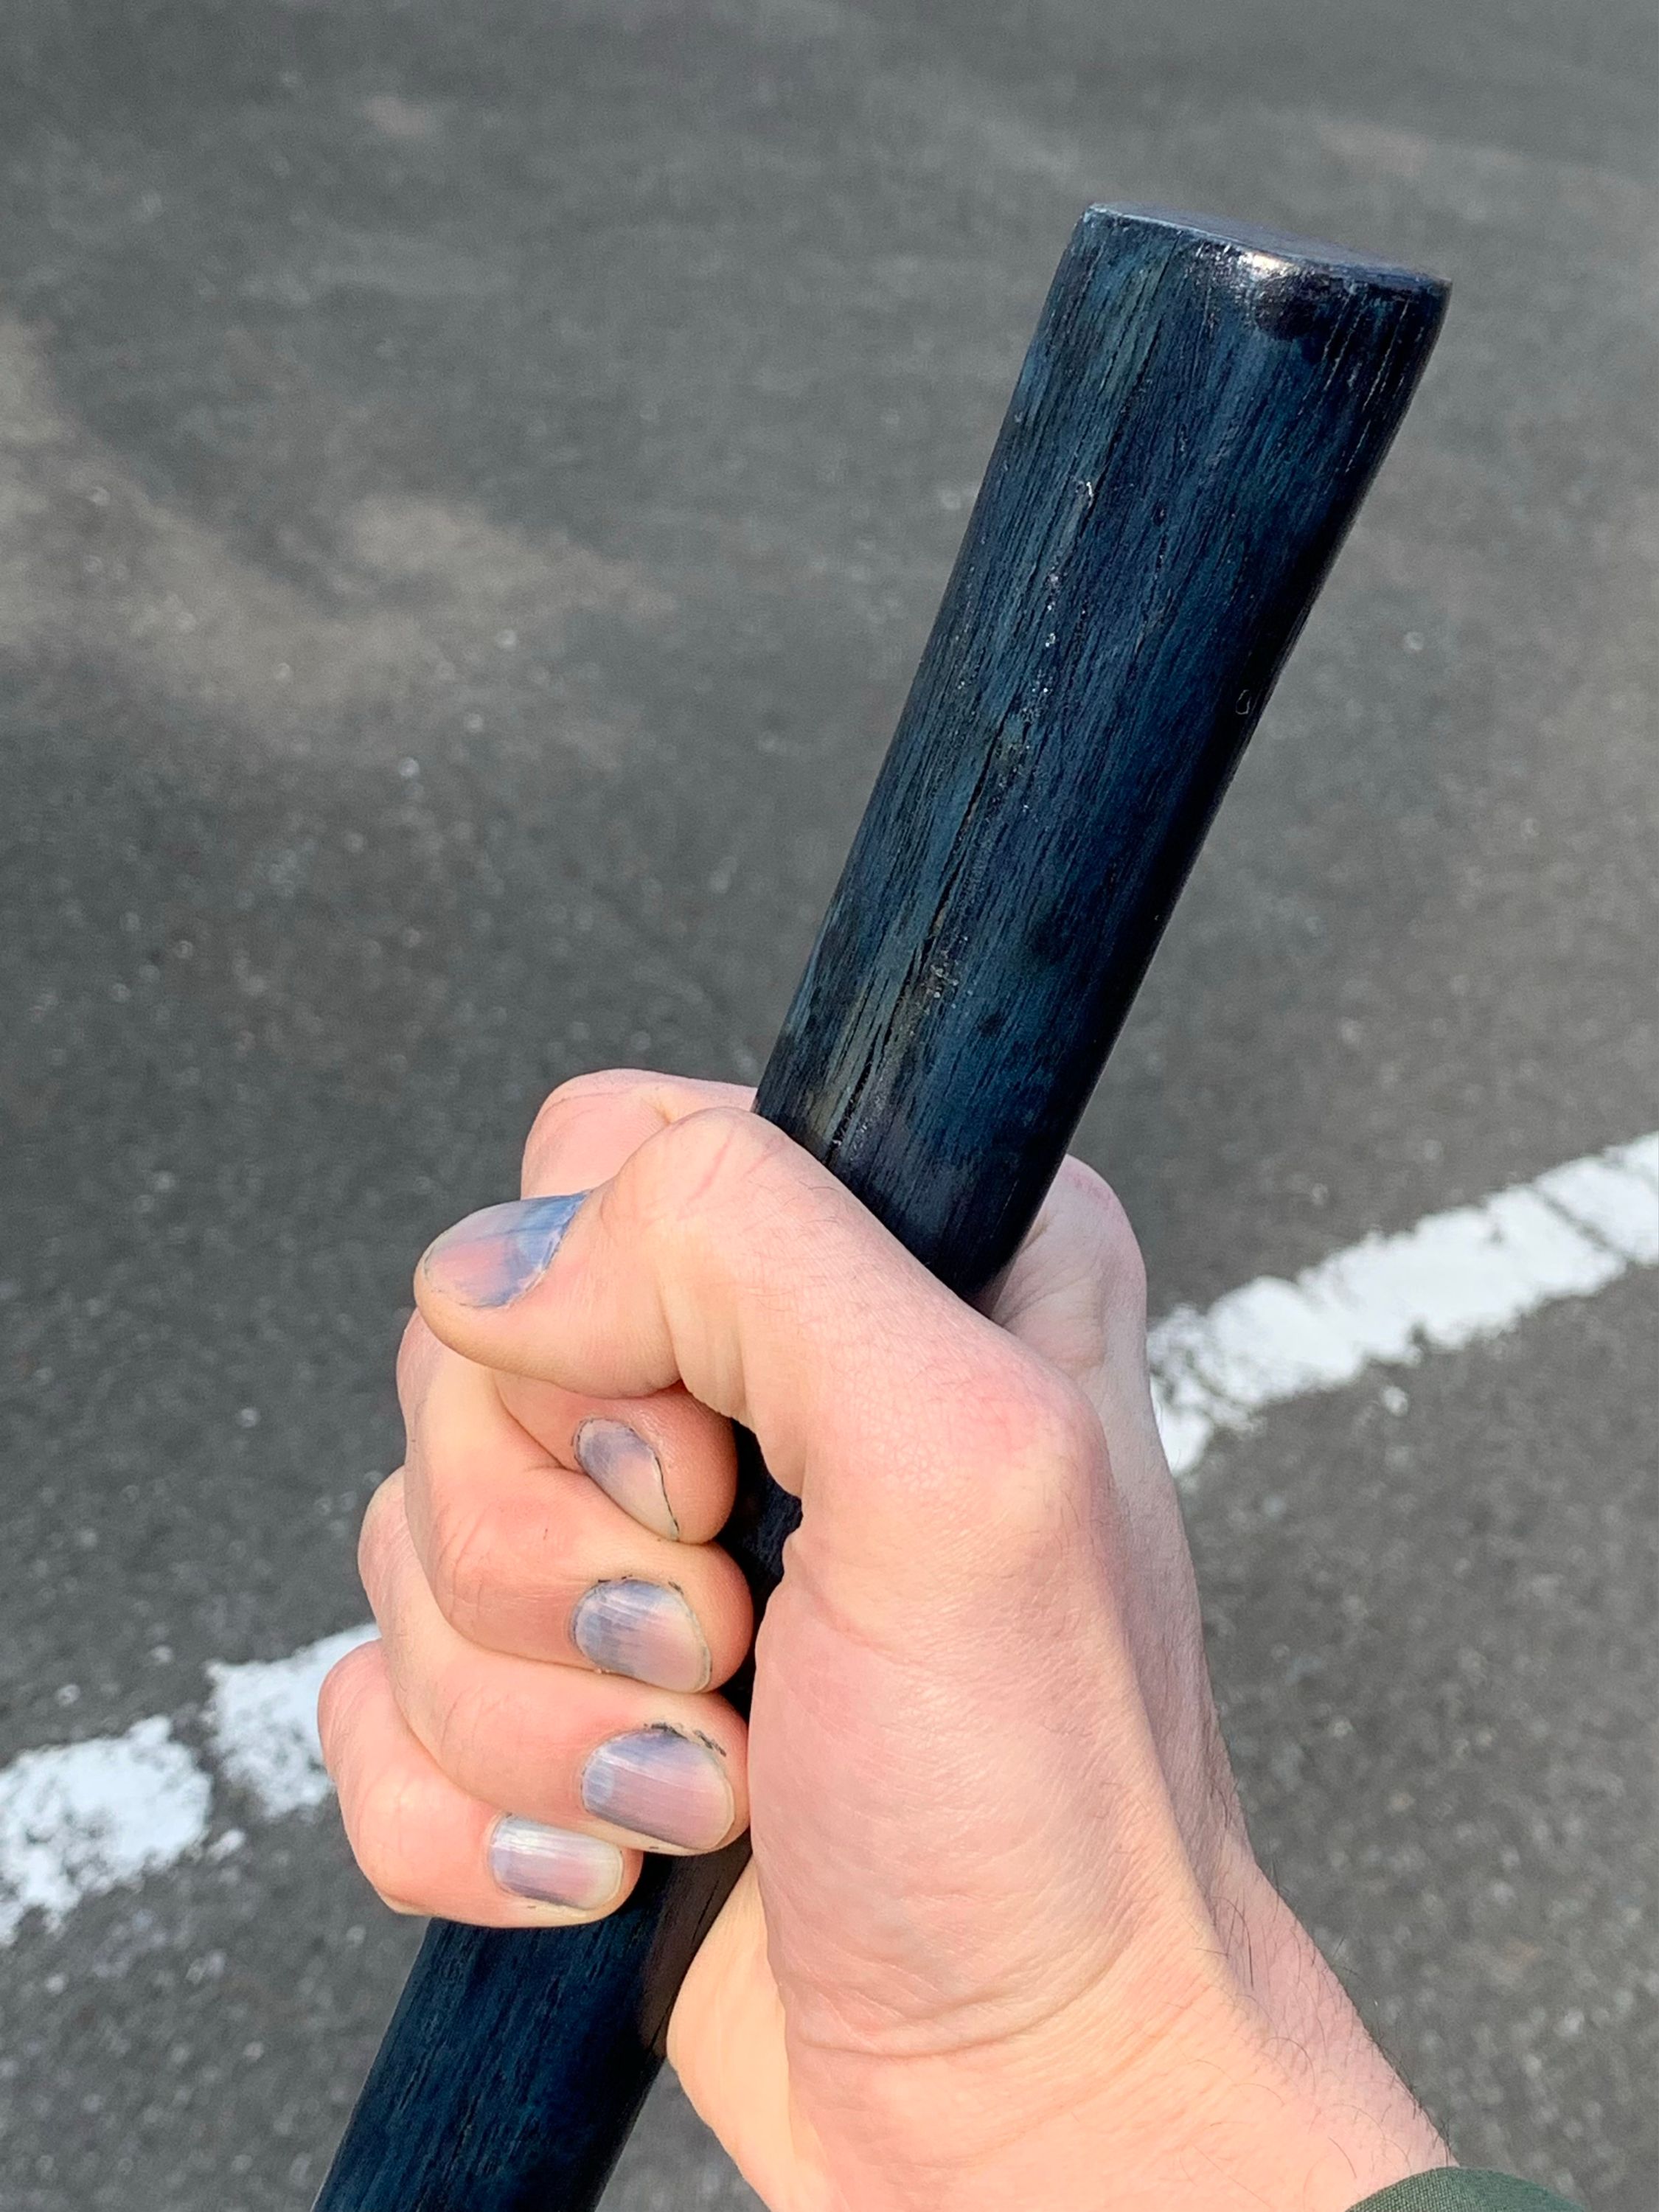 A hand with blue fingernails, dyed with indigo die, holds an indigo blue walking stick.